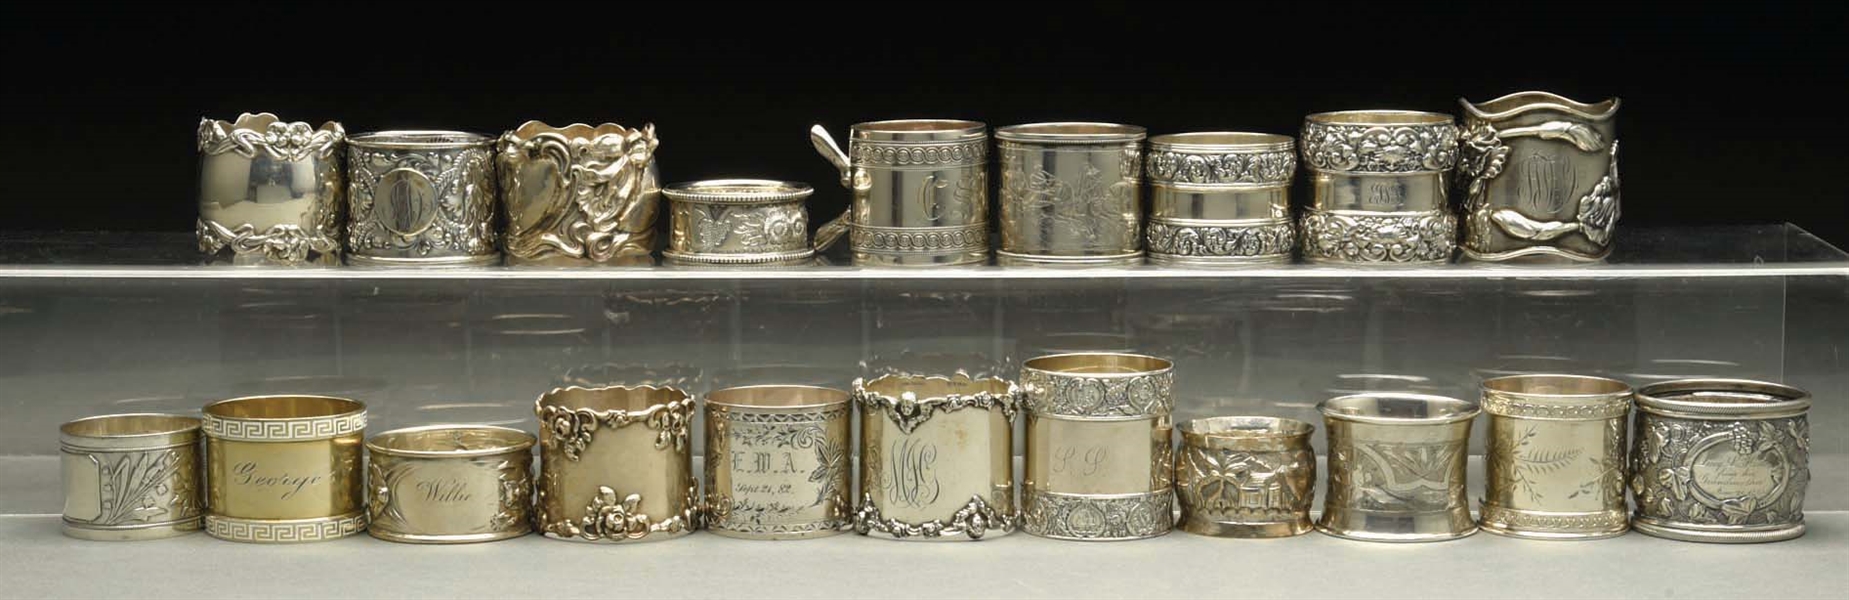 LOT OF 20: STERLING SILVER NAPKIN RINGS. 